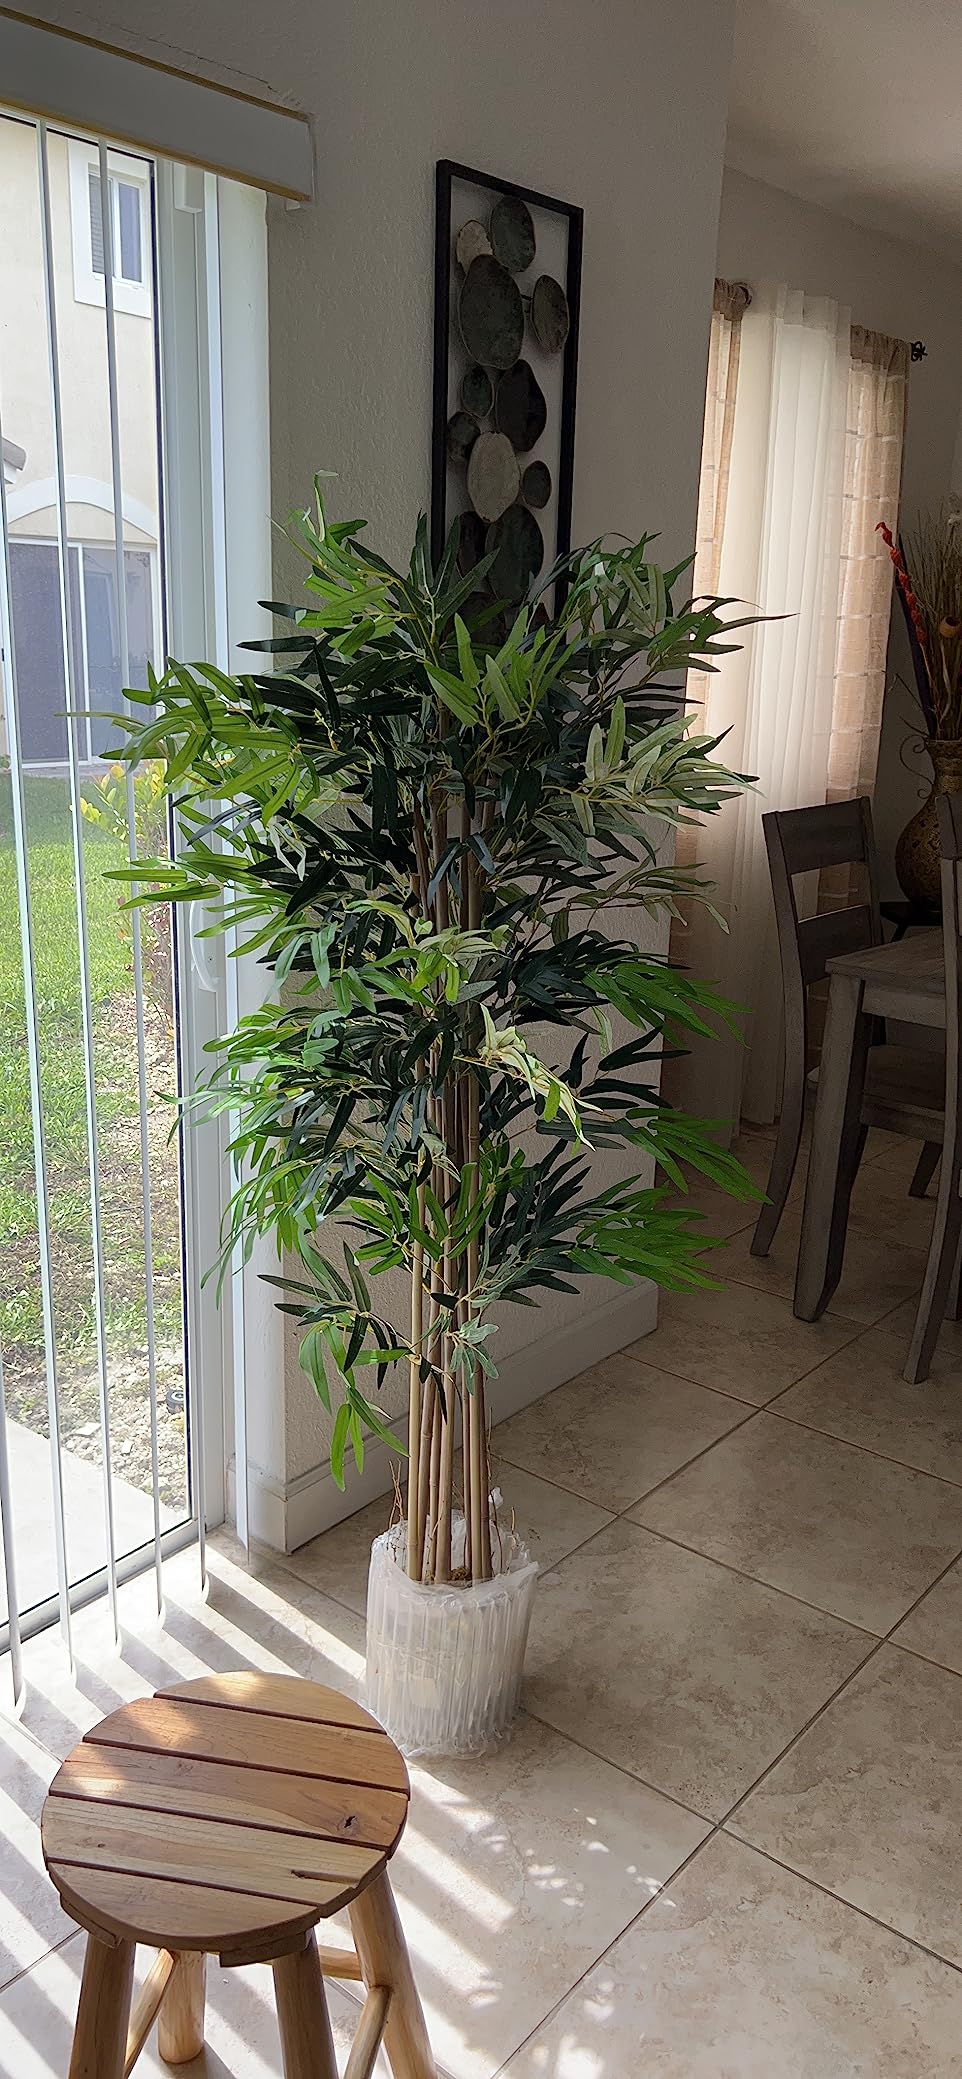 ANGELES HOME 5 ft. Green Artificial Bamboo Silk Tree Indoor-Outdoor  Decorative Planter in Pot,Faux Fake Tree Plant HW59-8CK-514 - The Home Depot